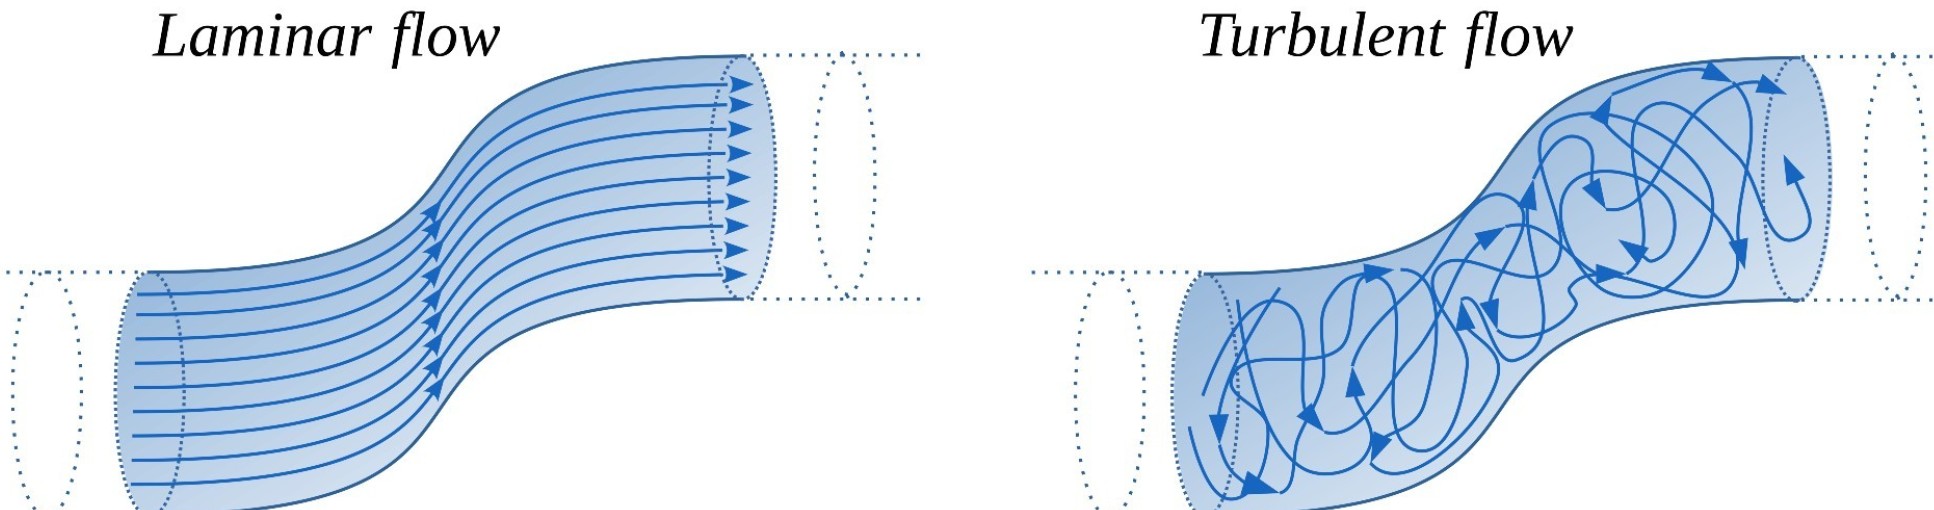 A diagram showing the difference between laminar and turbulent flows